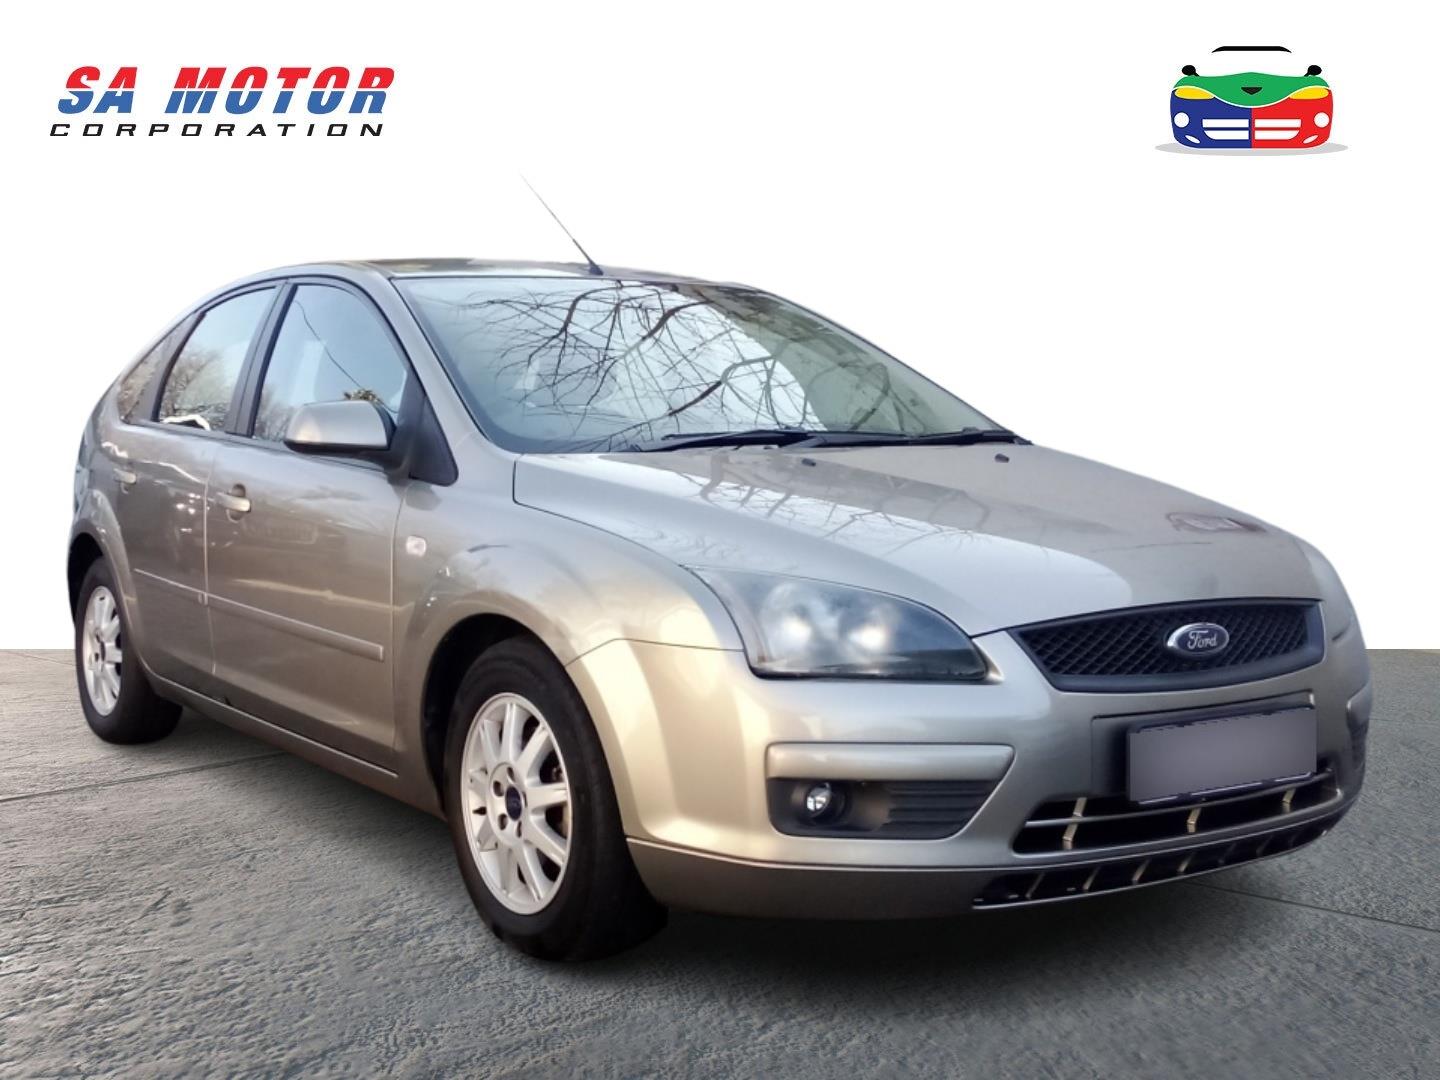 2006 Ford Focus 1.6 Si 5-Door for sale - 329487